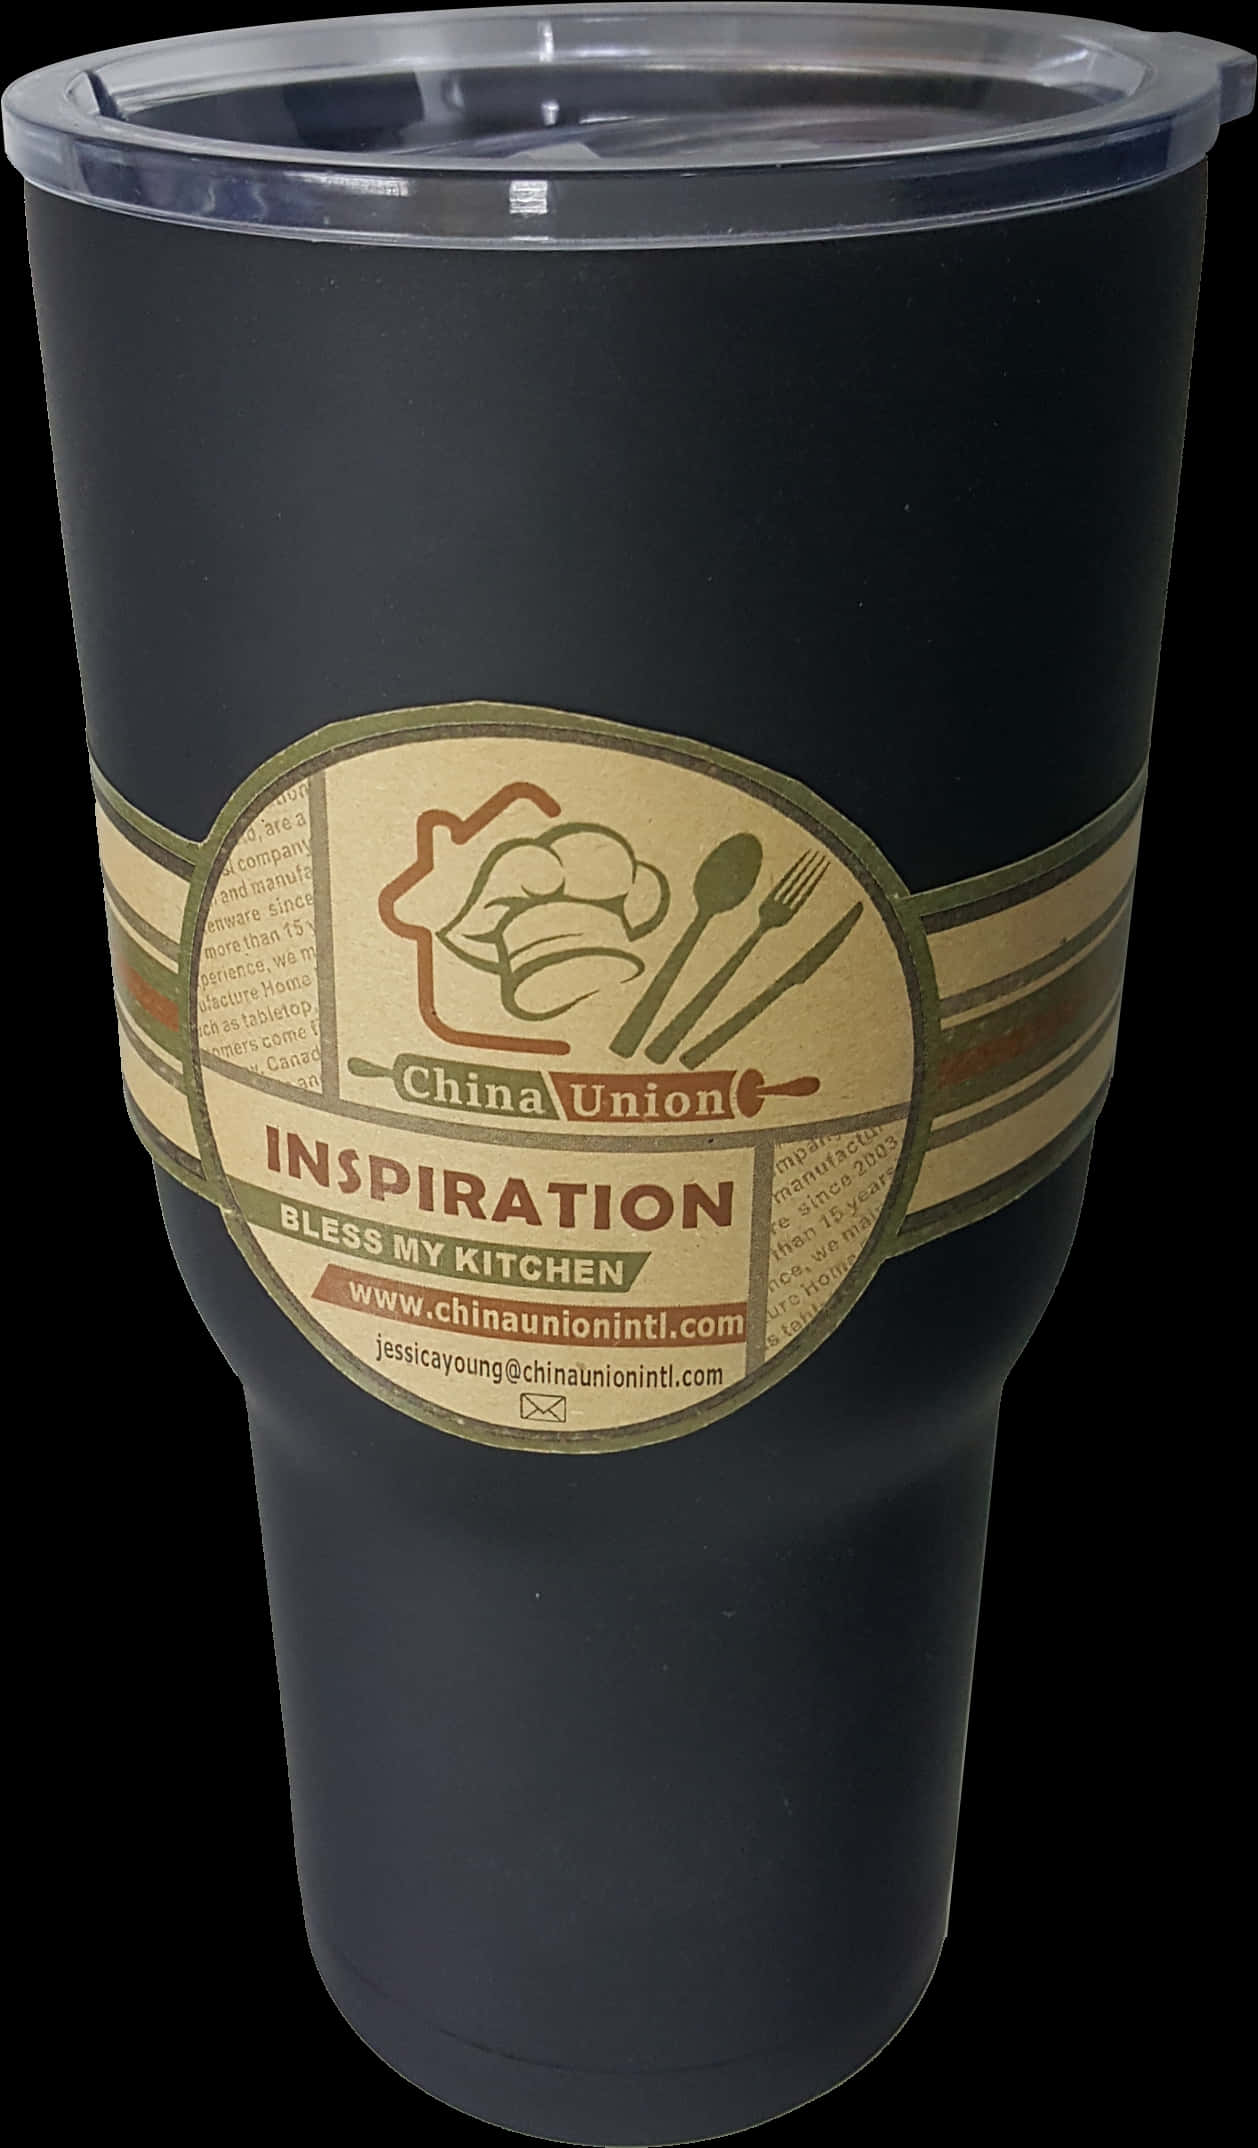 A Black Cup With A Logo On It